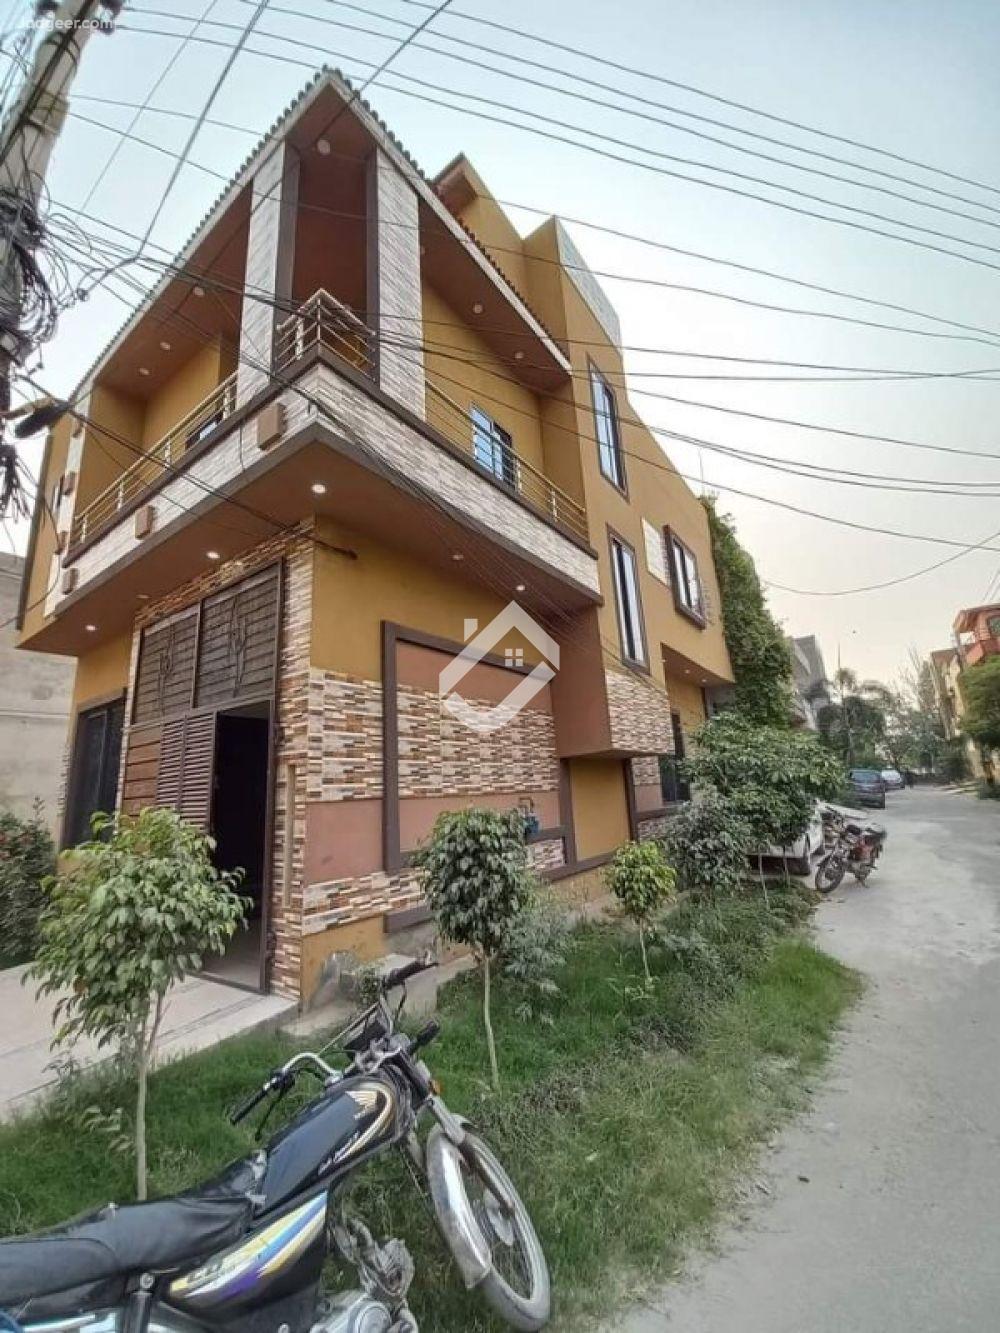 View  4 Marla Double Unit House Is For Sale In Lahore Medical Housing Society in Lahore Medical Housing Society, Lahore